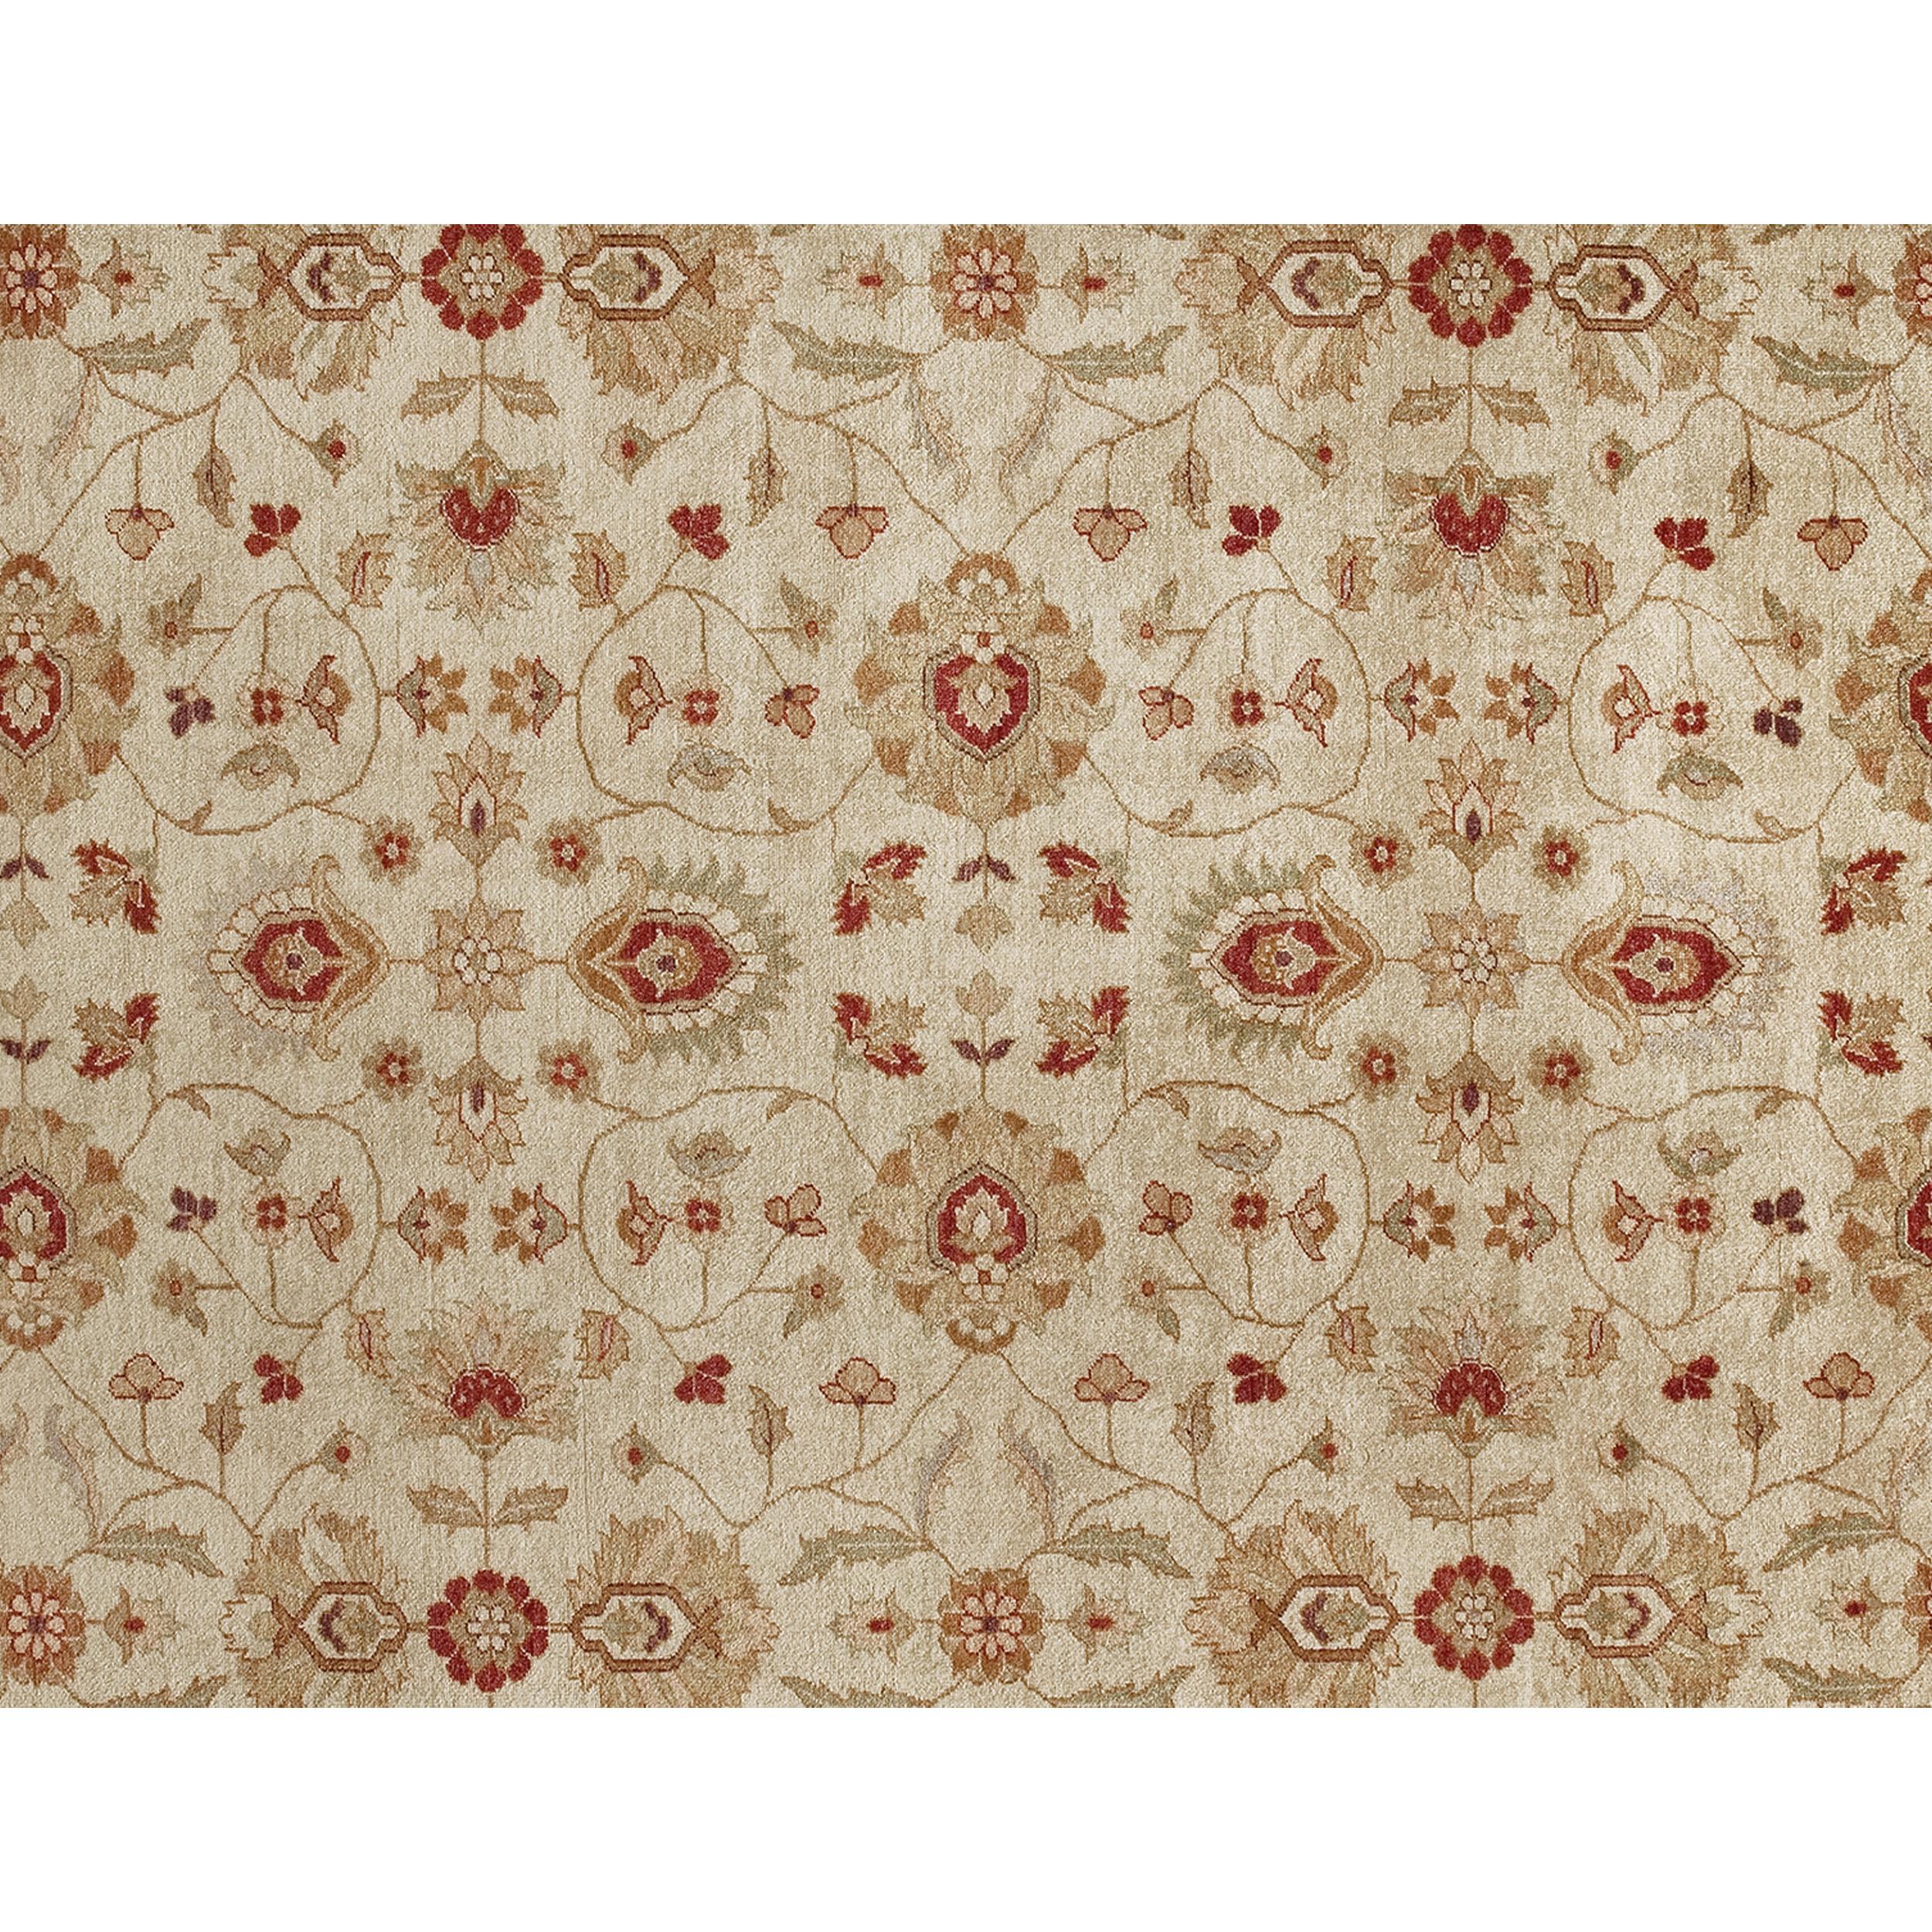 Agra Luxury Traditional Hand-Knotted Lilihan Cream and Red 11x18 Rug For Sale